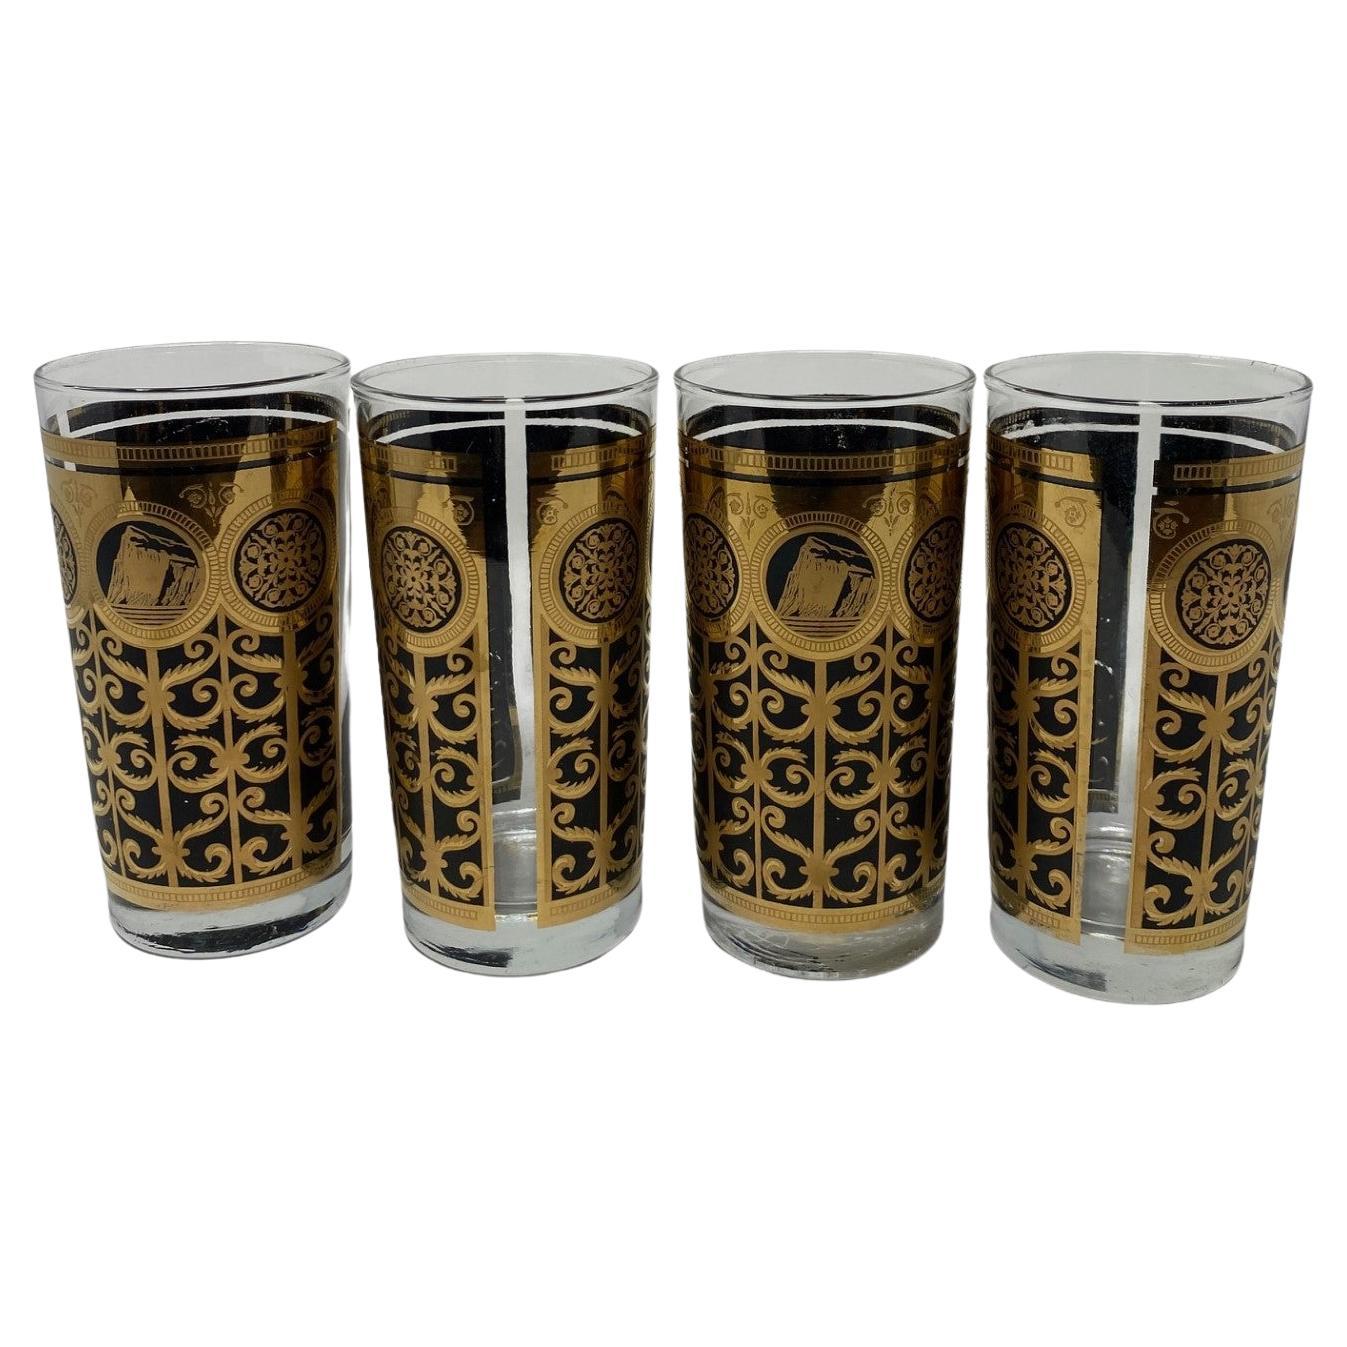 1965 Fred Press Black and Gold Prudential Insurance Co. Hi-ball Glasses Set of 4 For Sale